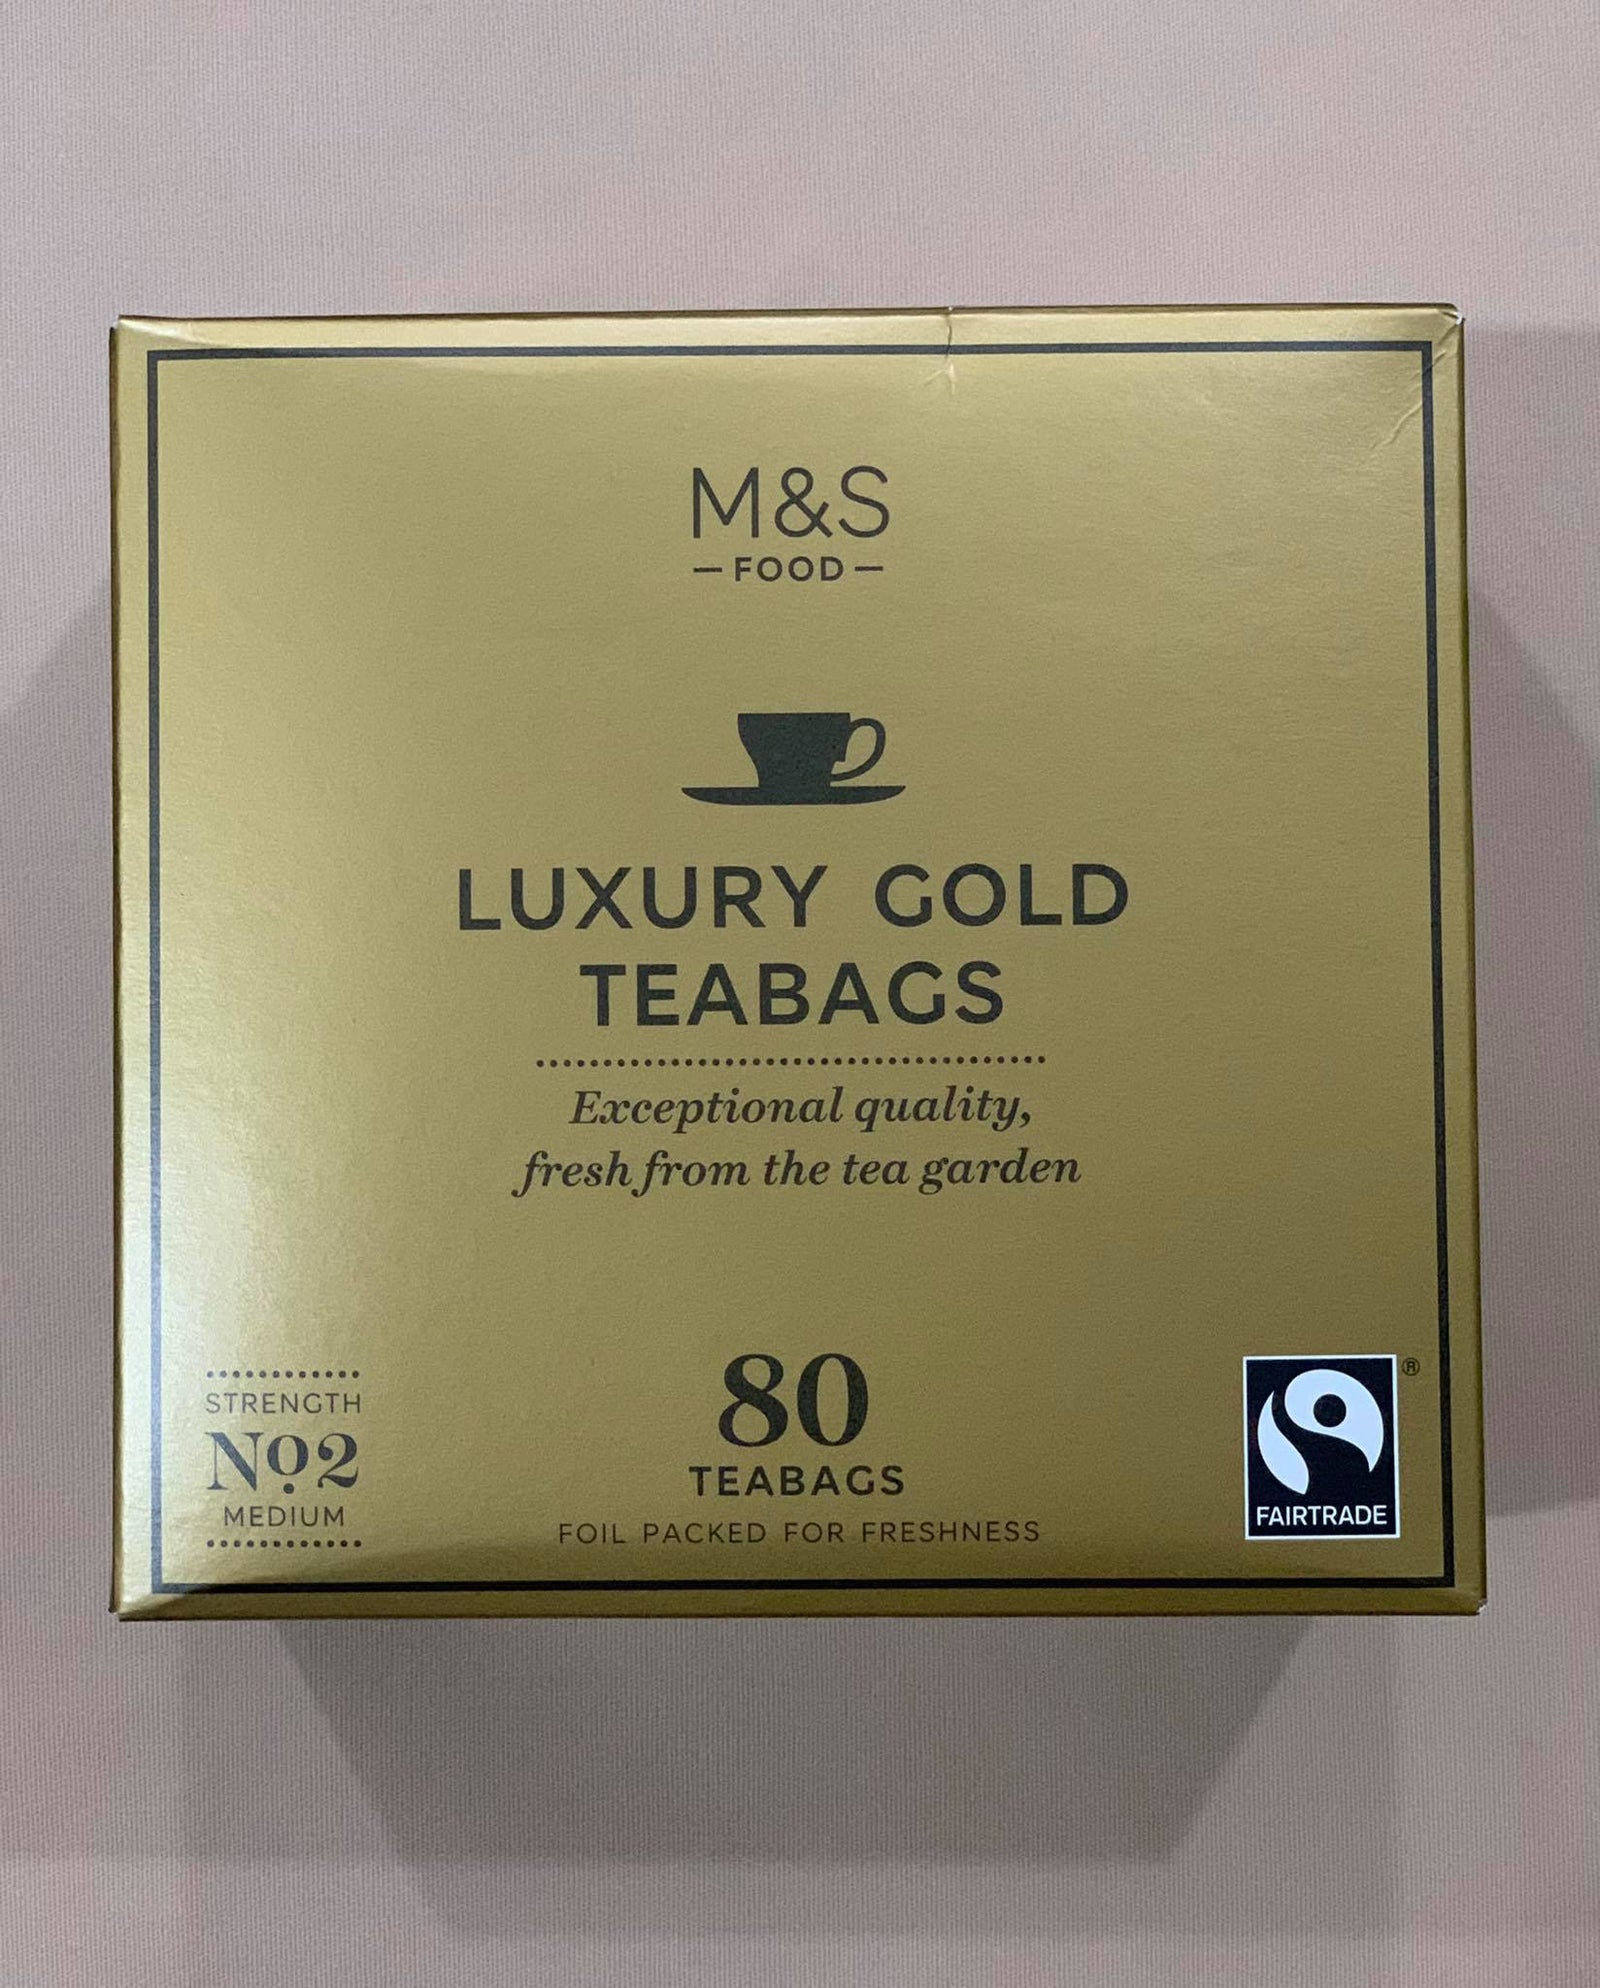 M & S Tagged Tea Bags - Little taste of home